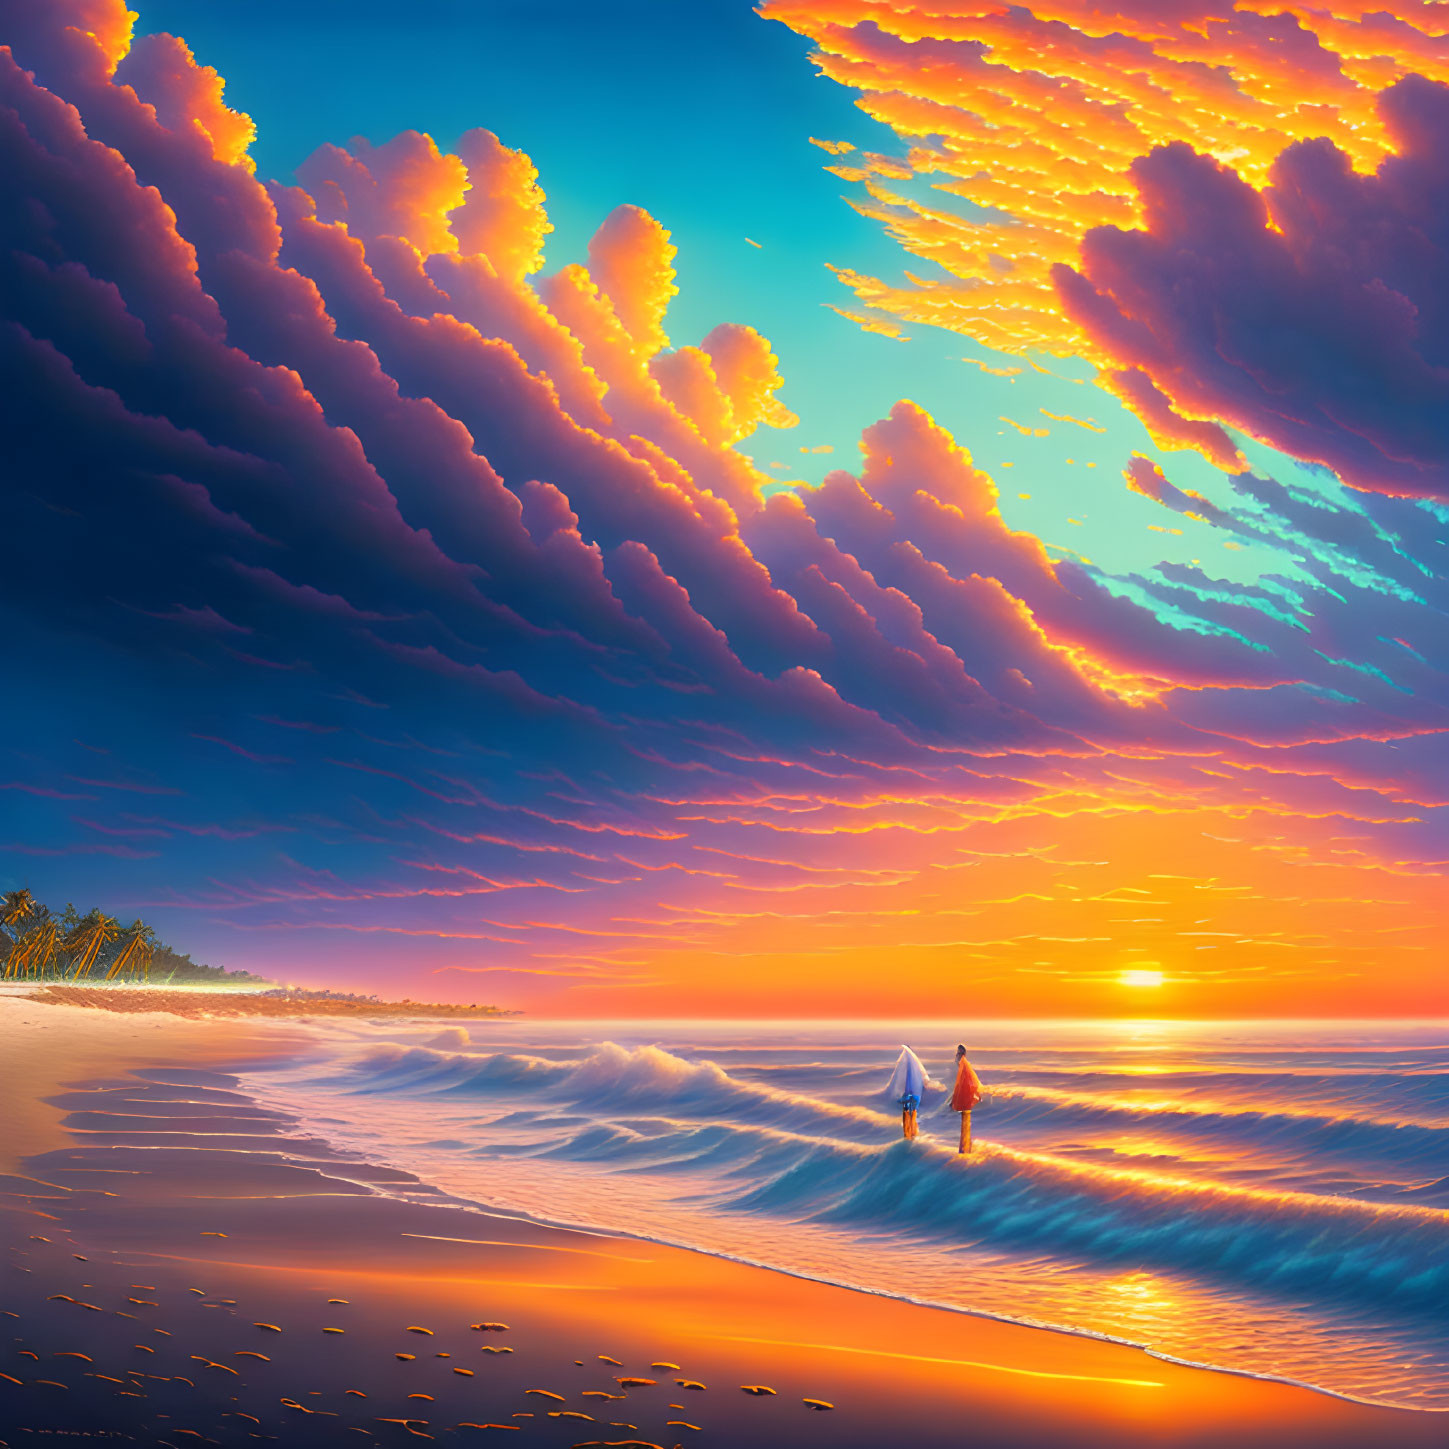 Serene beach sunset with billowy clouds and wading figures